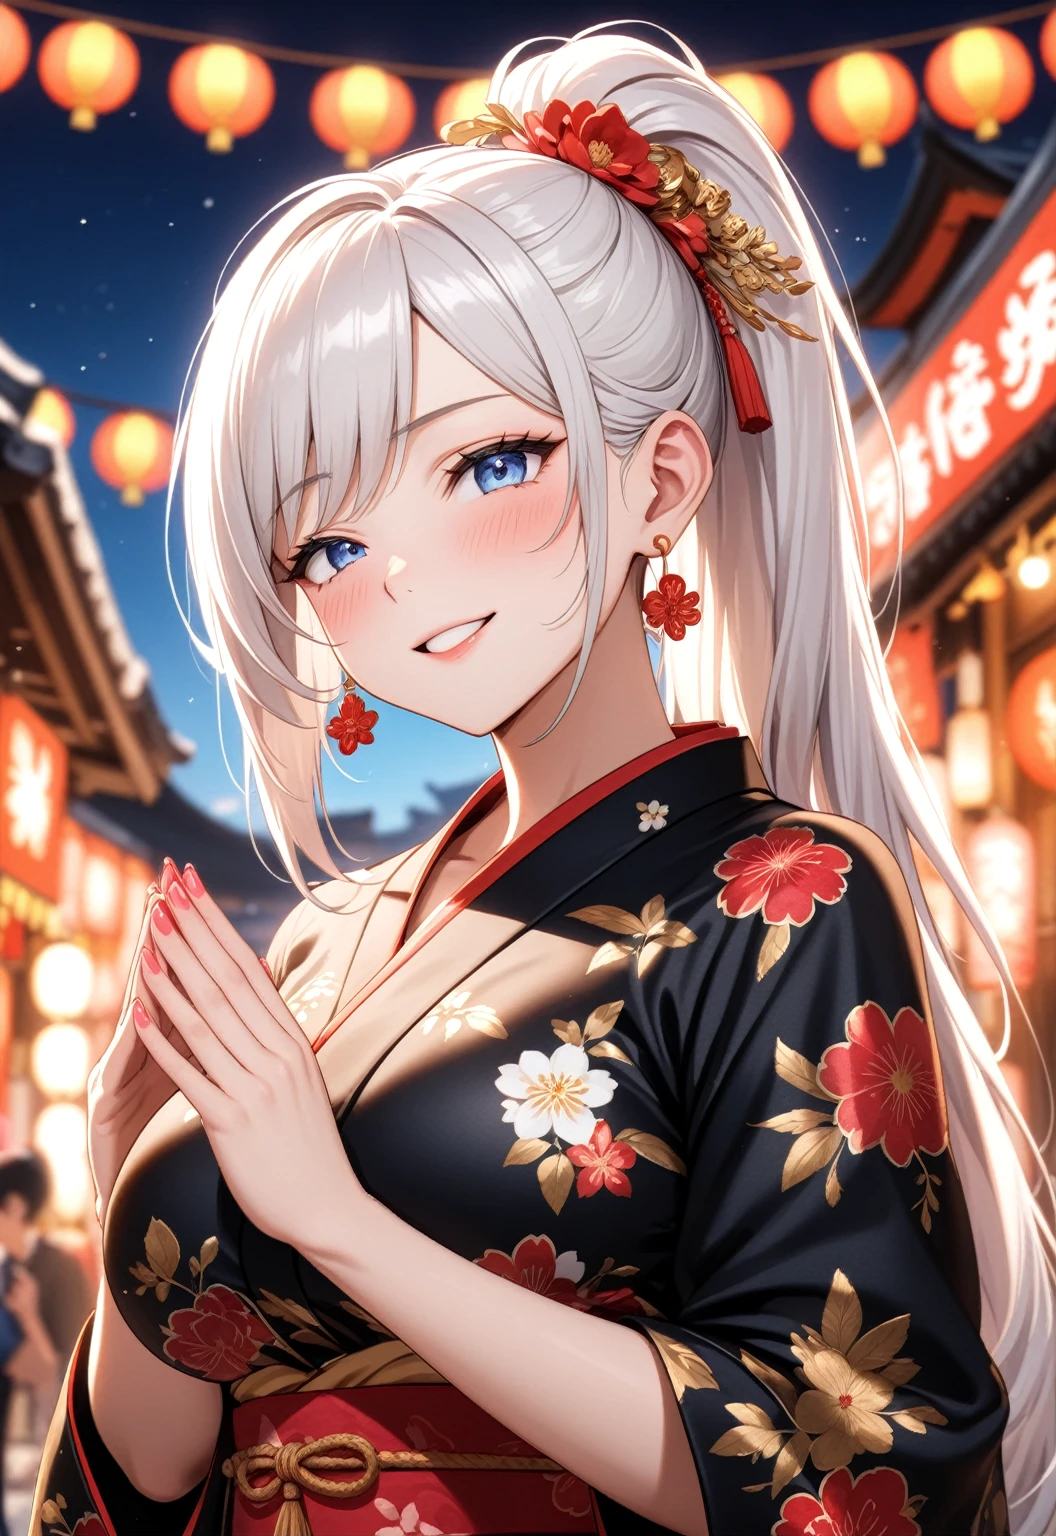 ((One person woman)), Beautiful Face,Laugh shyly,((Wink:1.9)),Laughing with your mouth open,turn bright red,Glossy pink lips,night,Shrine festival stalls,((Anime style background)),masterpiece, highest quality, so beautiful, up to date, Complex details, (Pink long nails),AI-generated, Complex,High resolution, highest quality, super high quality,3D Images、View your audience、3D Images,one person,Long white hair,High Ponytail,Blue eyes,Anime woman posing for a photo, [[Fine grain、Colorful eyes、Shining Eyes:1.15]],(Squint your eyes:1.1),a hyperRealistic , hyperRealistic , Realistic,Long haired white haired anime woman, Smooth anime CG art, A woman in a colorful kimono with gold embroidery, (Black kimono),Red floral pattern,Long flower hair ornament,Big earrings,(Big Breasts:1.1),Mature Body,tall,BIG ASS,Fine details,Tight waist,Abdominal muscles,(Face close-up:1.5),Tilt your face,Shooting from an angle,Praying with hands together,